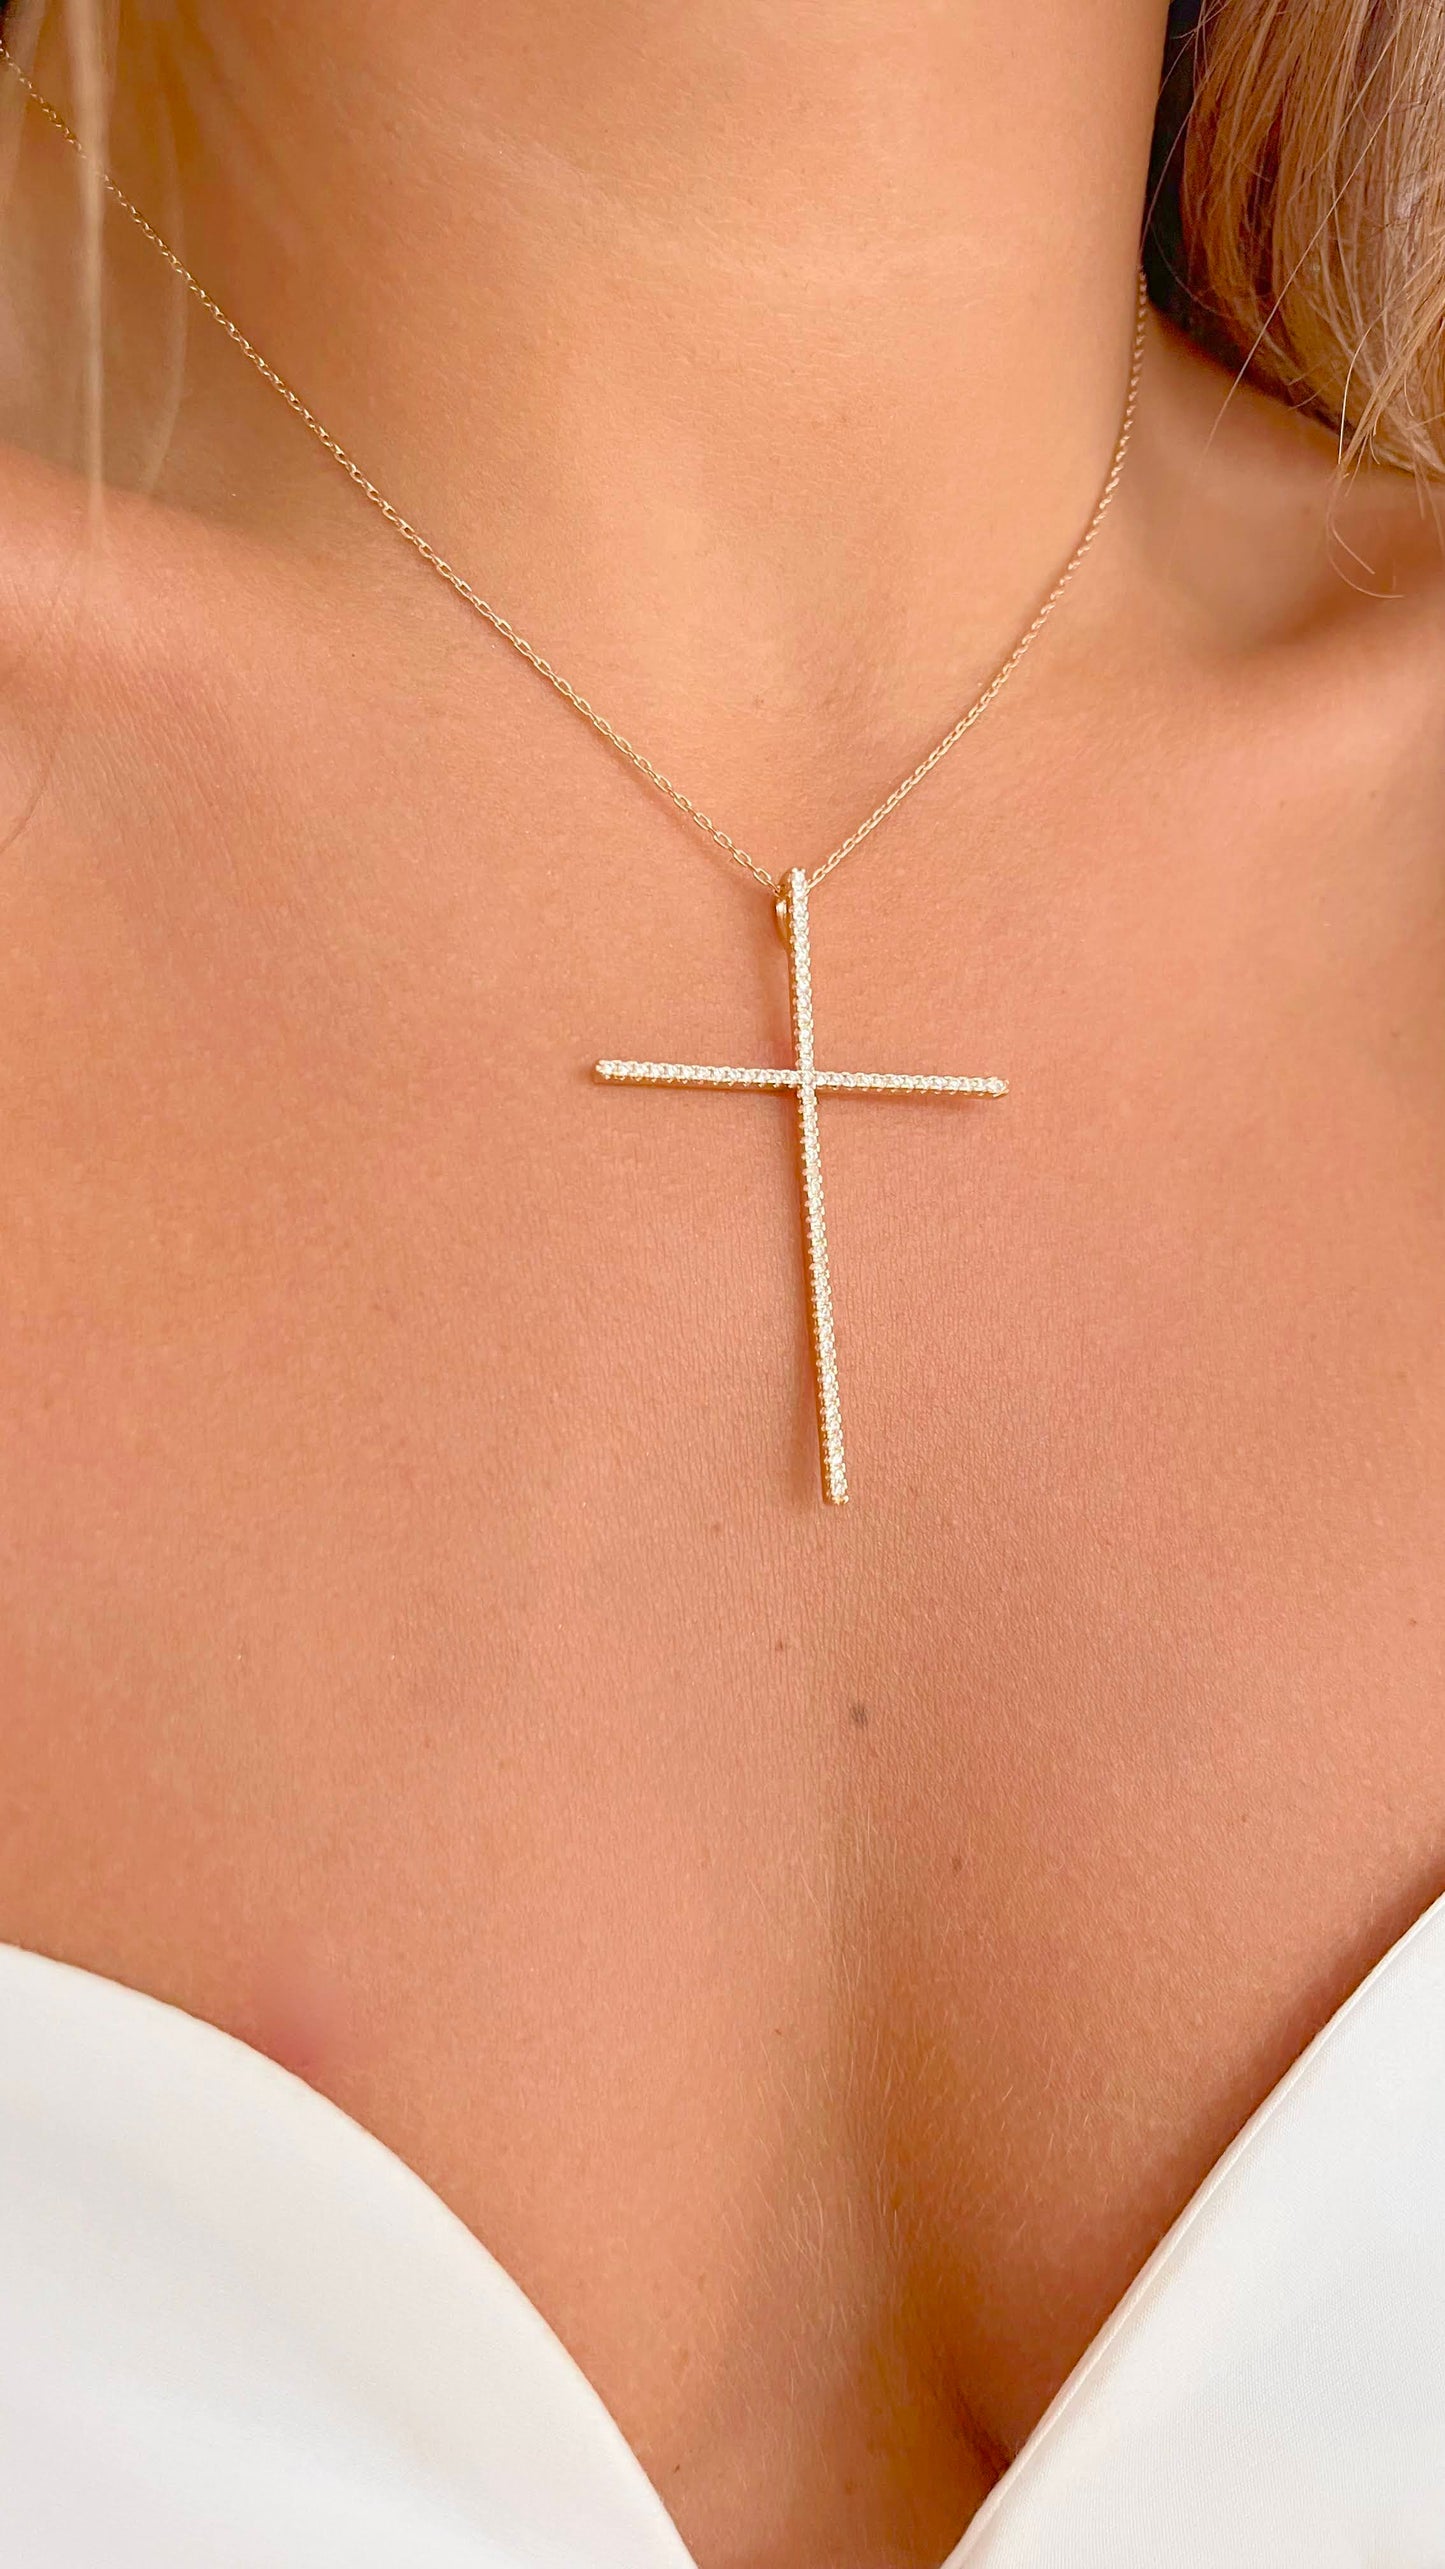 18K gold plated cross necklace with white CZ